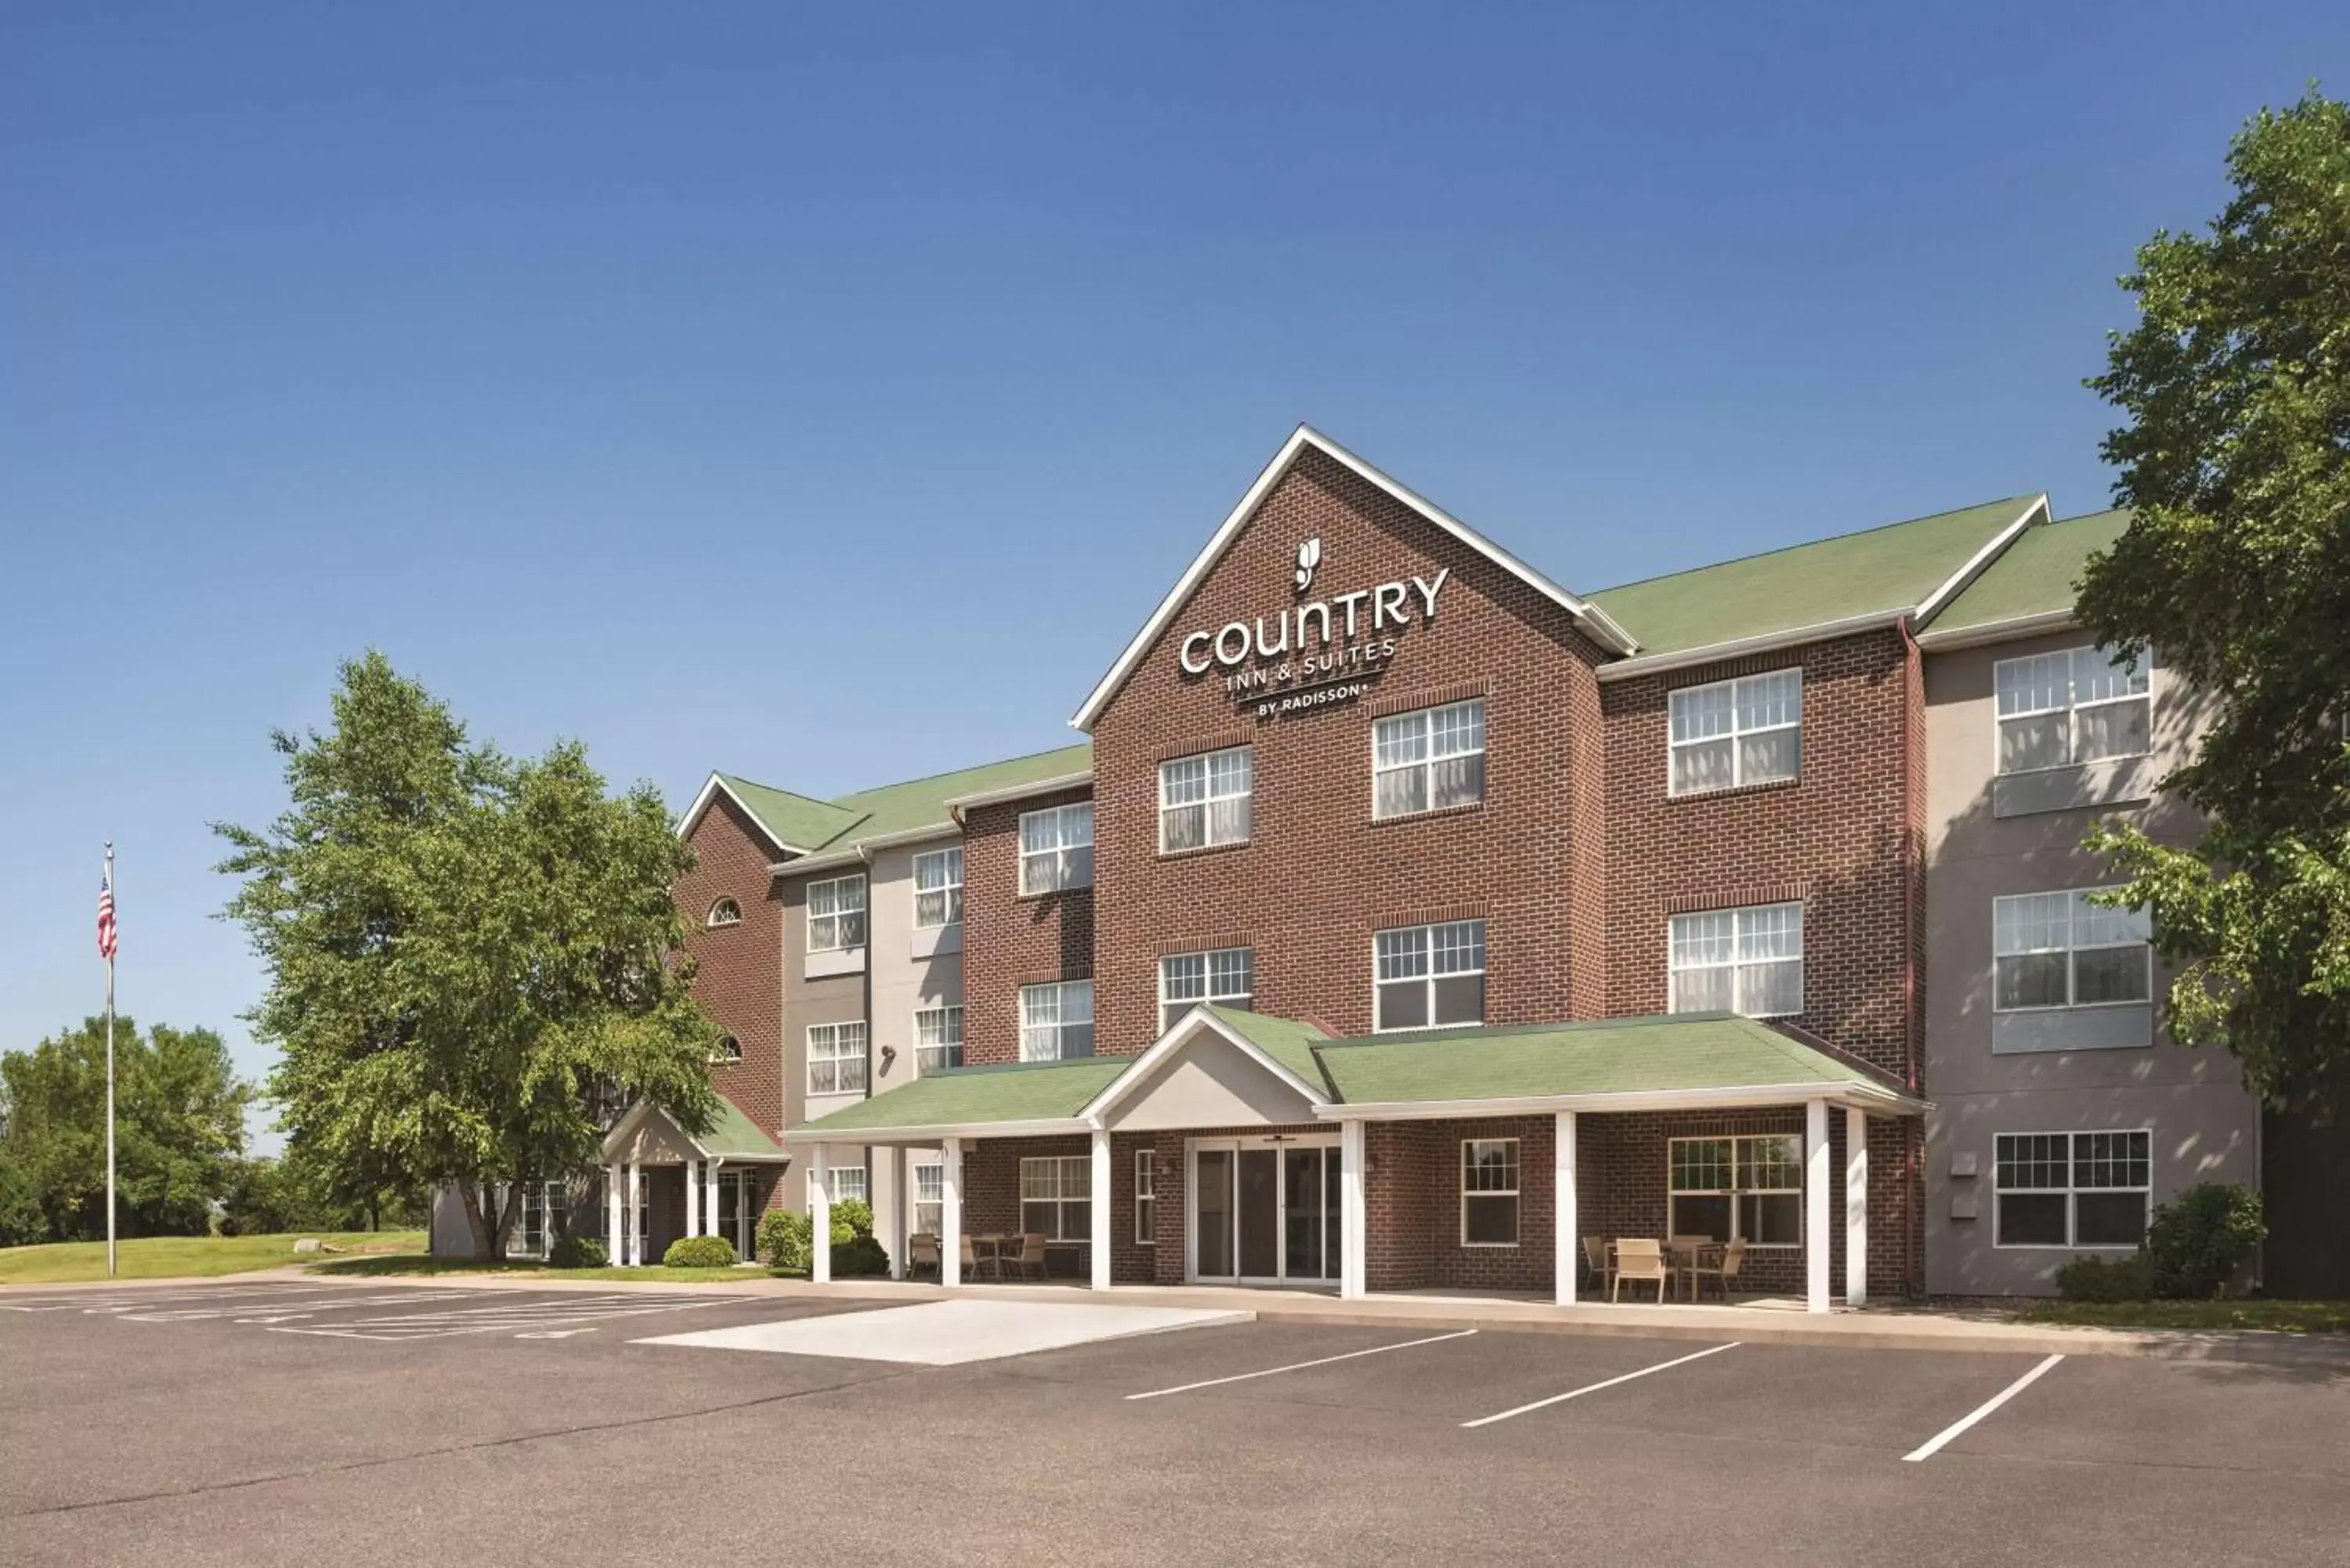 Property building in Country Inn & Suites by Radisson, Cottage Grove, MN